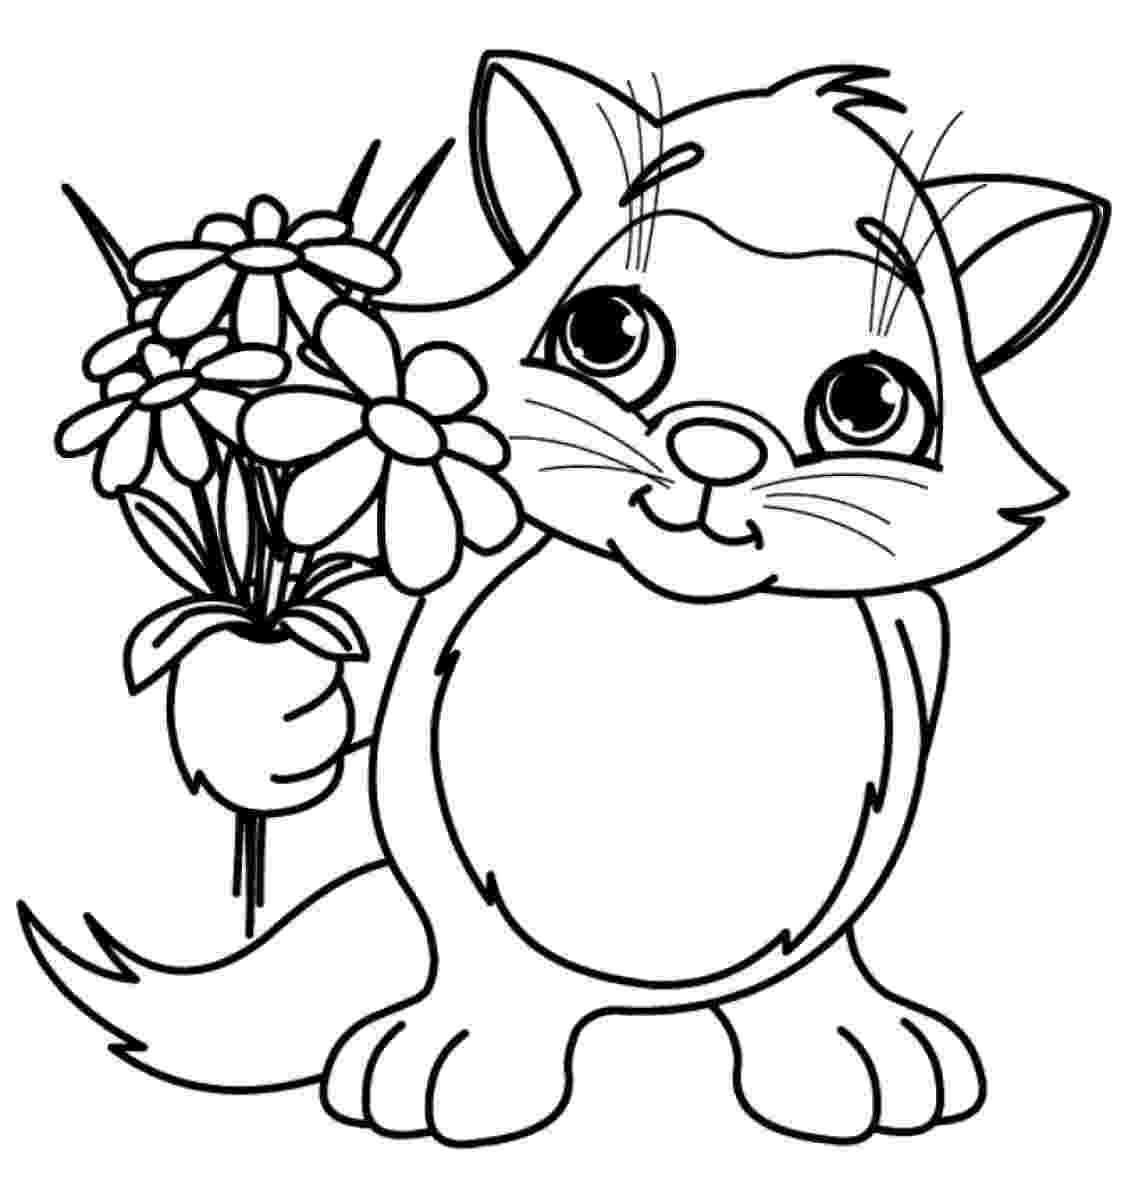 flower pictures to print and color free printable flower coloring pages for kids best to and pictures color flower print 